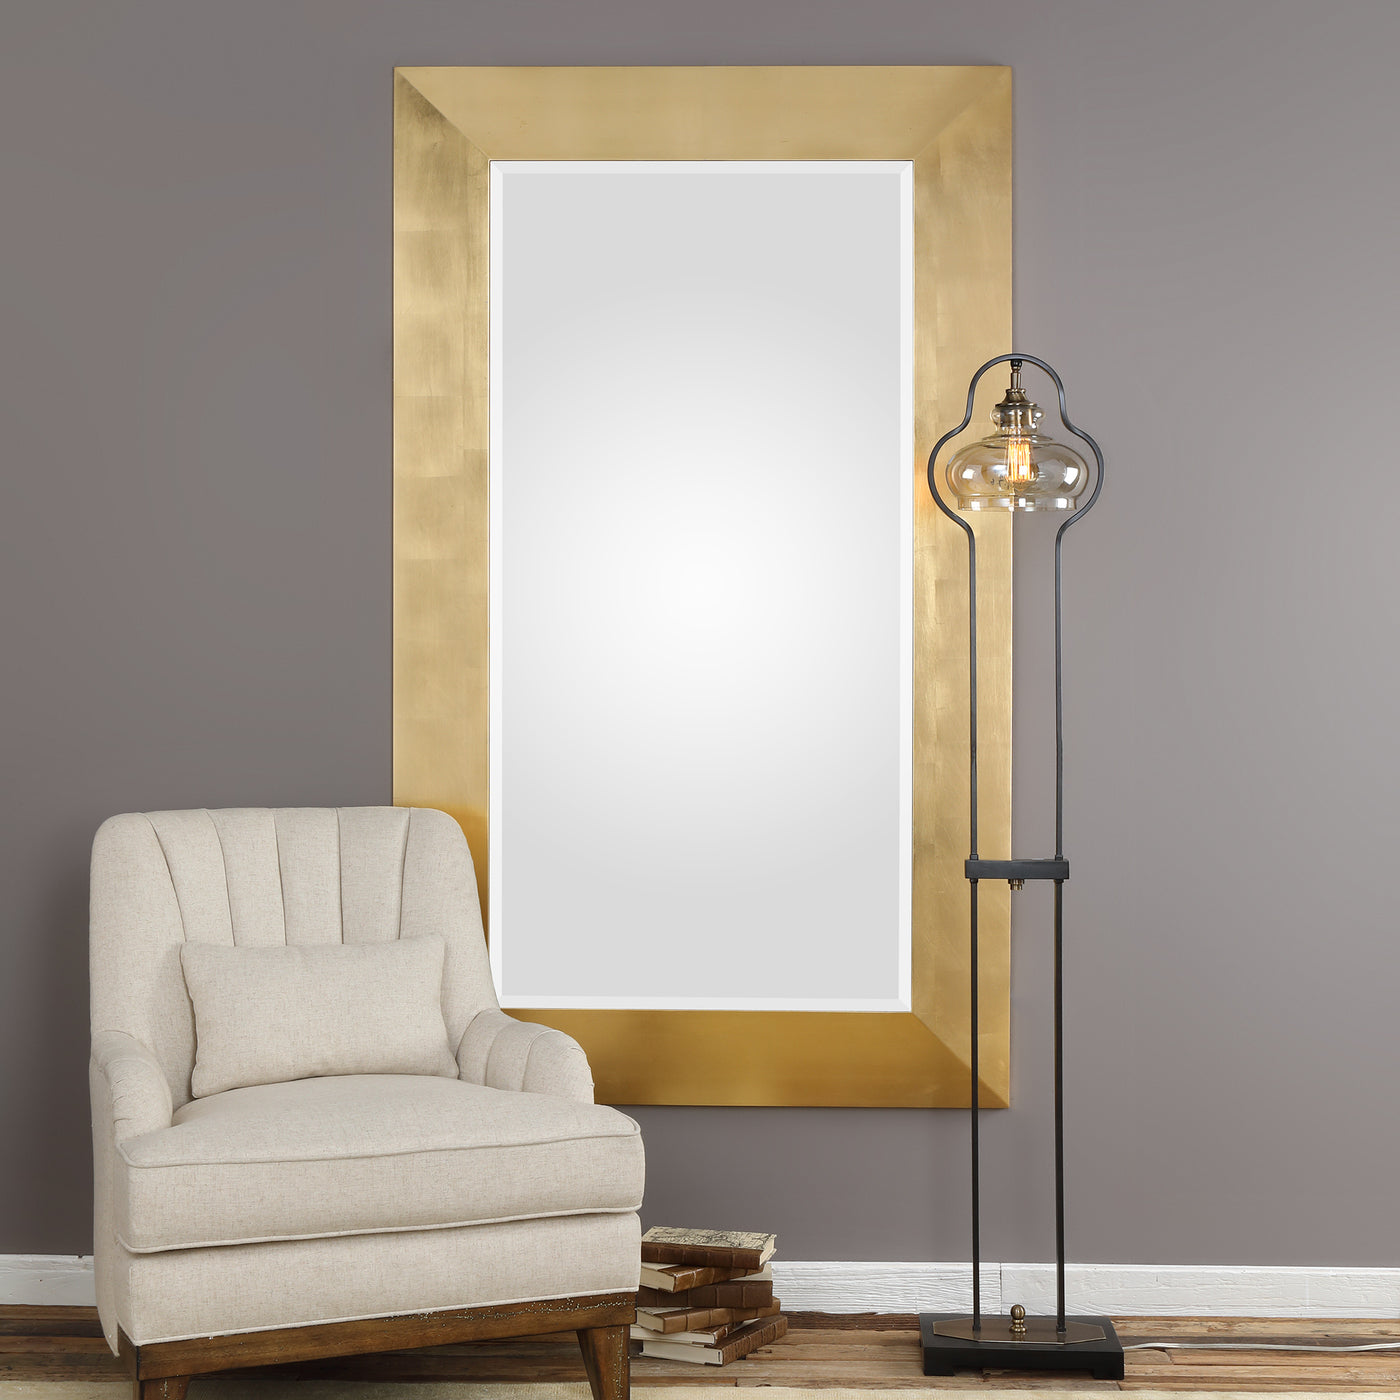 This Solid Pine Frame Features A Sleek Design Finished In A Hand Applied Gold Leaf. Mirror Features A Generous 1 1/4" Beve...